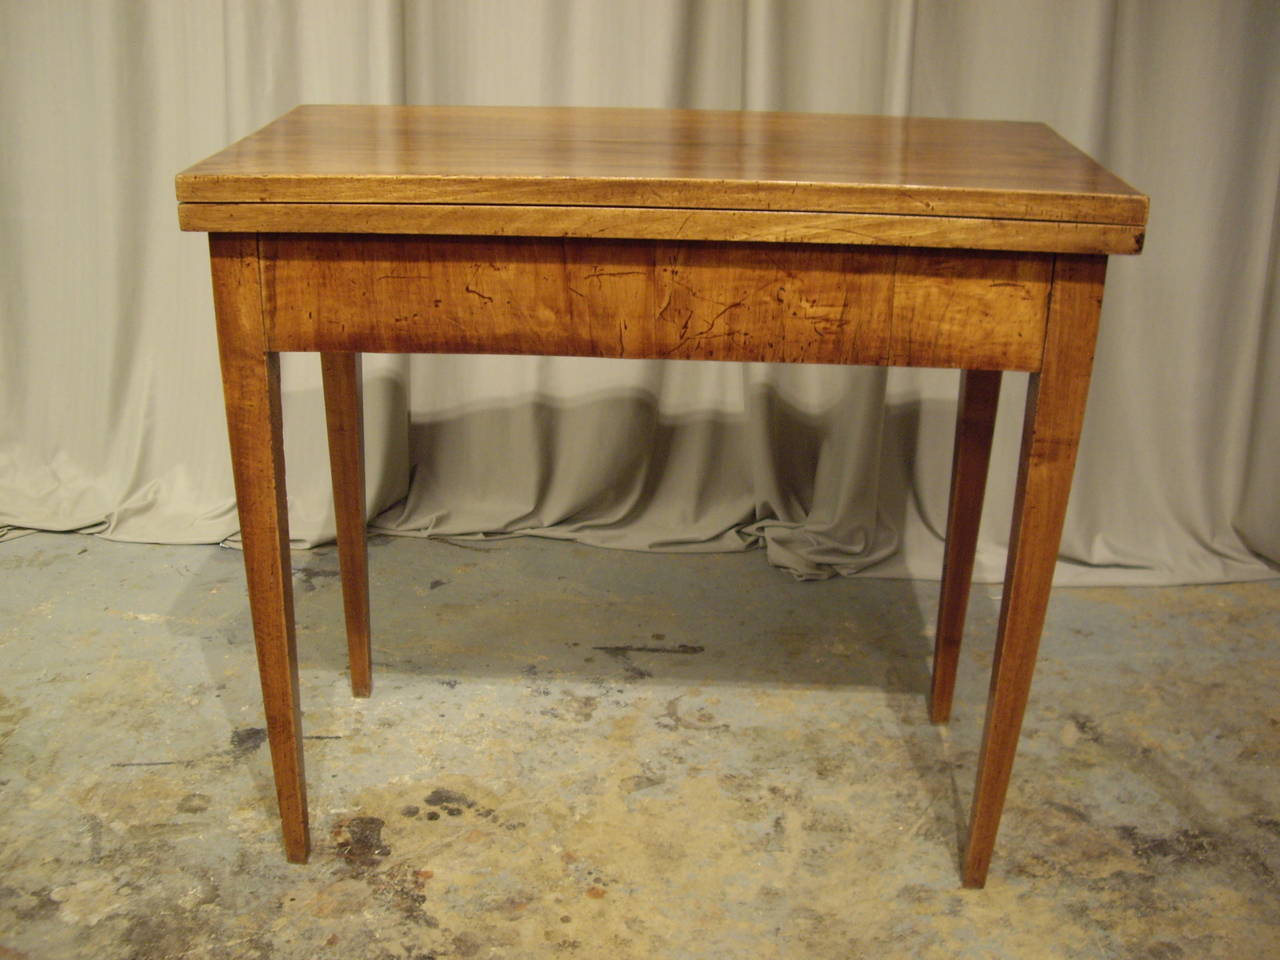 Very nicely restored walnut card table that turns and makes a table with center base on four legs.